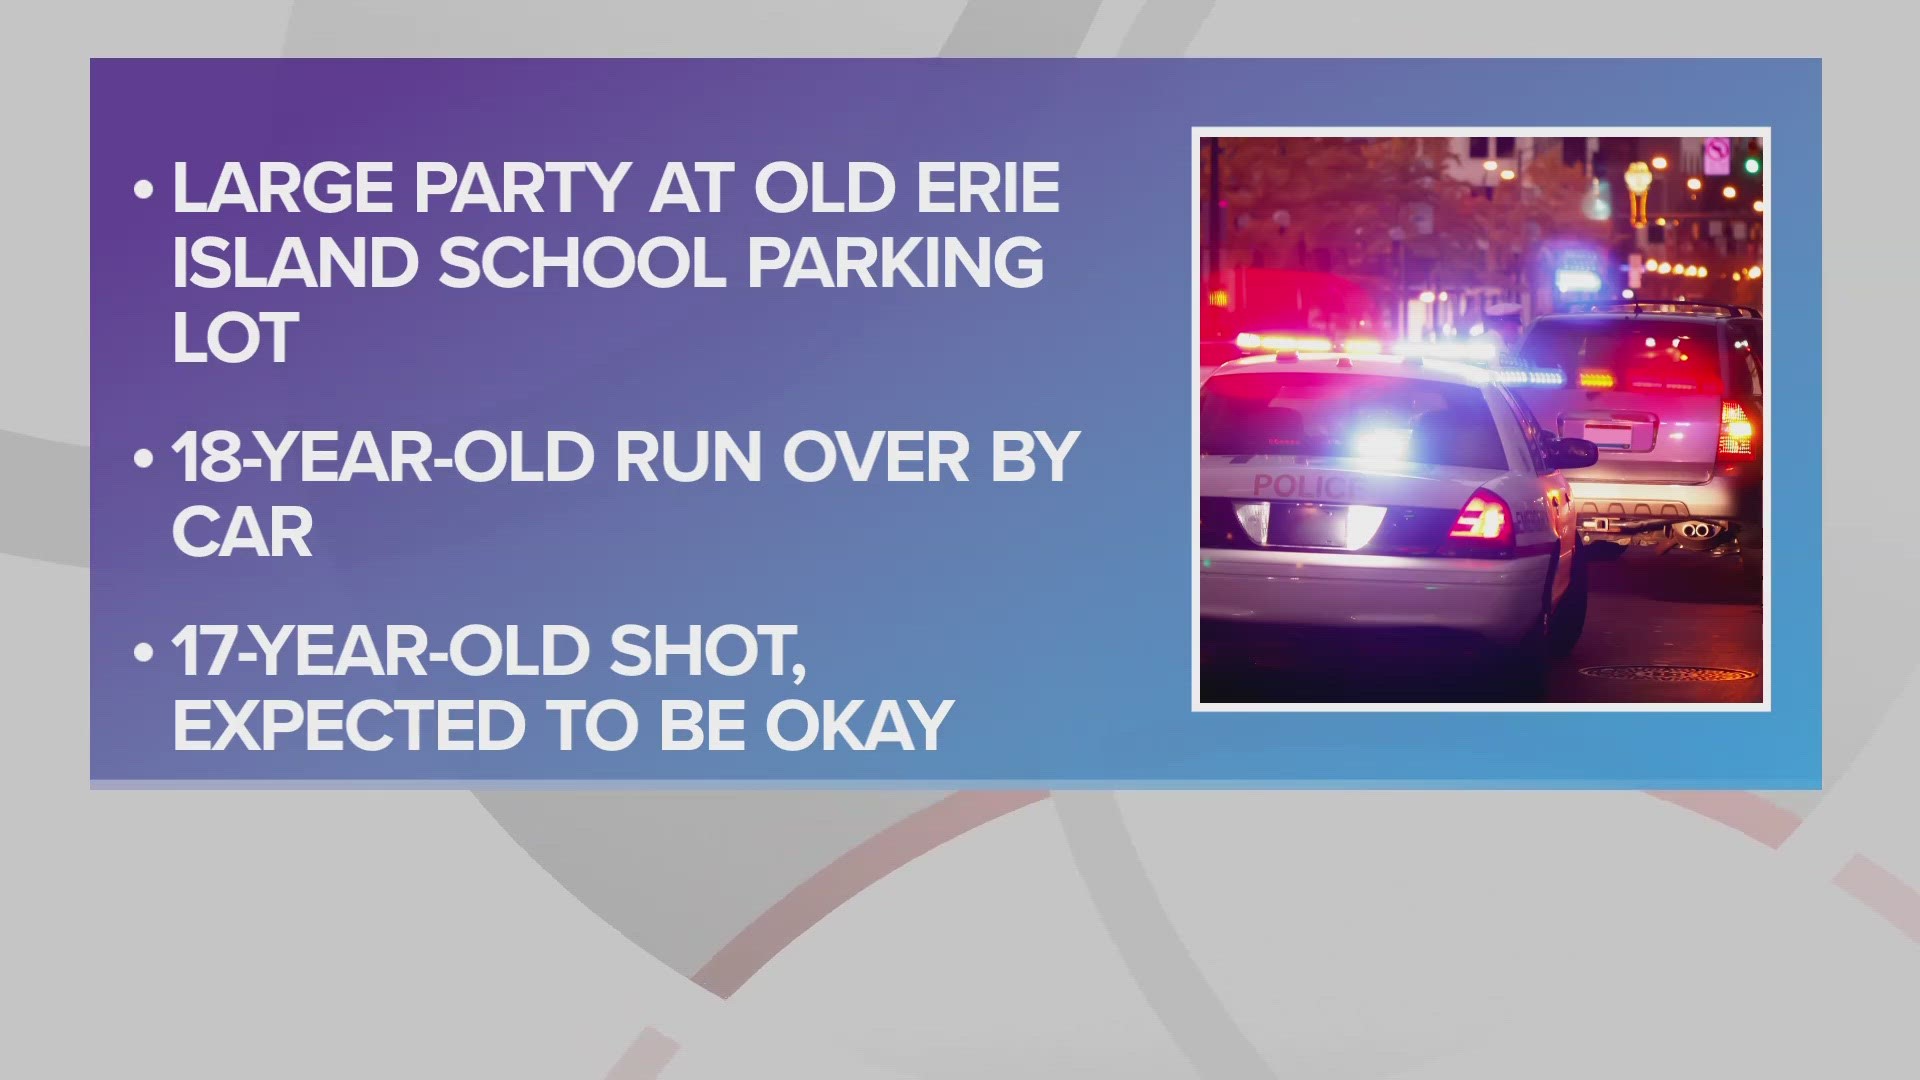 Police said an 18-year-old man 'was run over, possibly inadvertently, while trying to escape the volley of gunshots.'